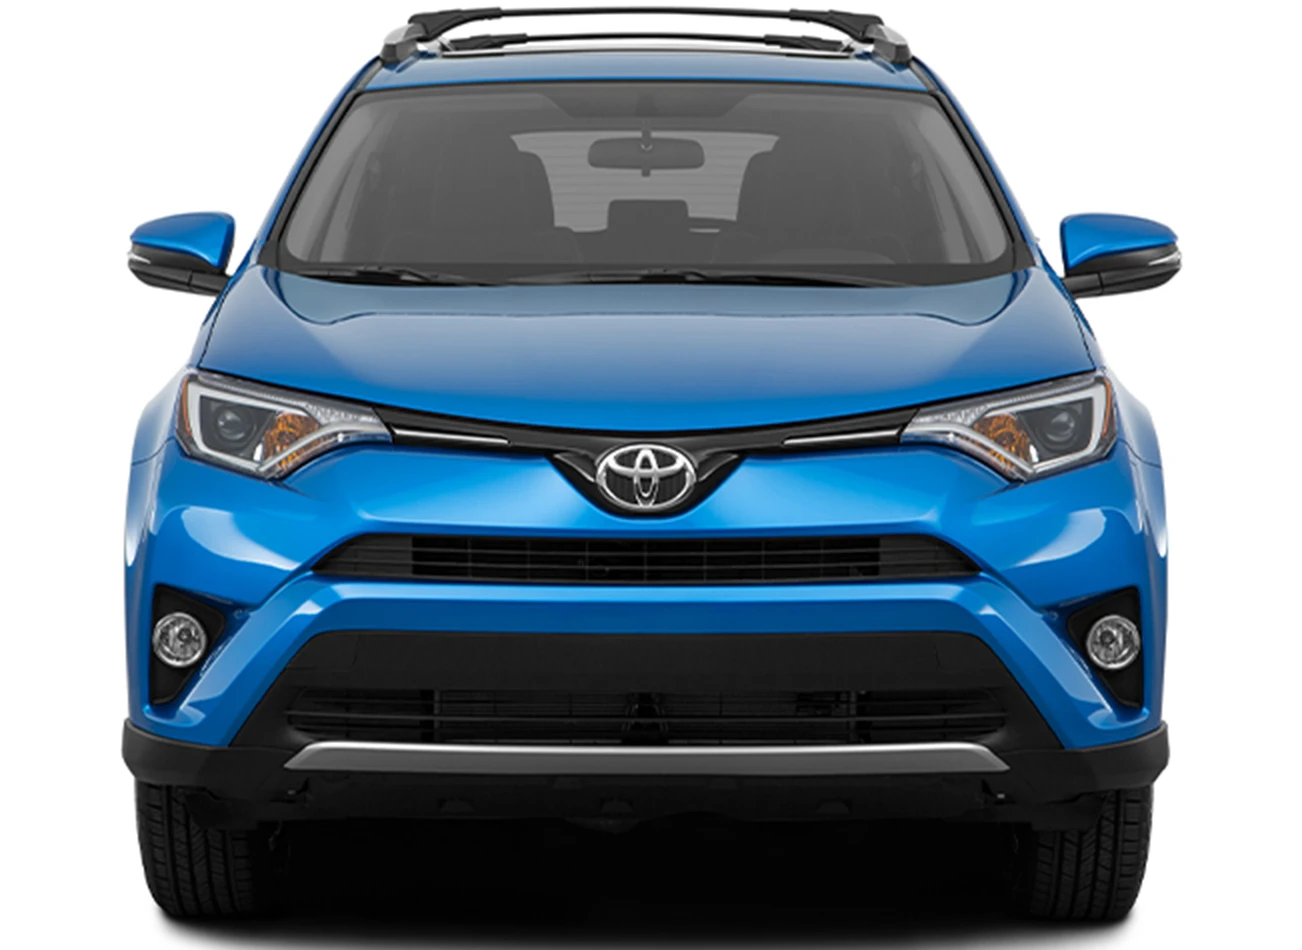 2017 Toyota RAV4 Review: Front Vehicle Exterior | CarMax